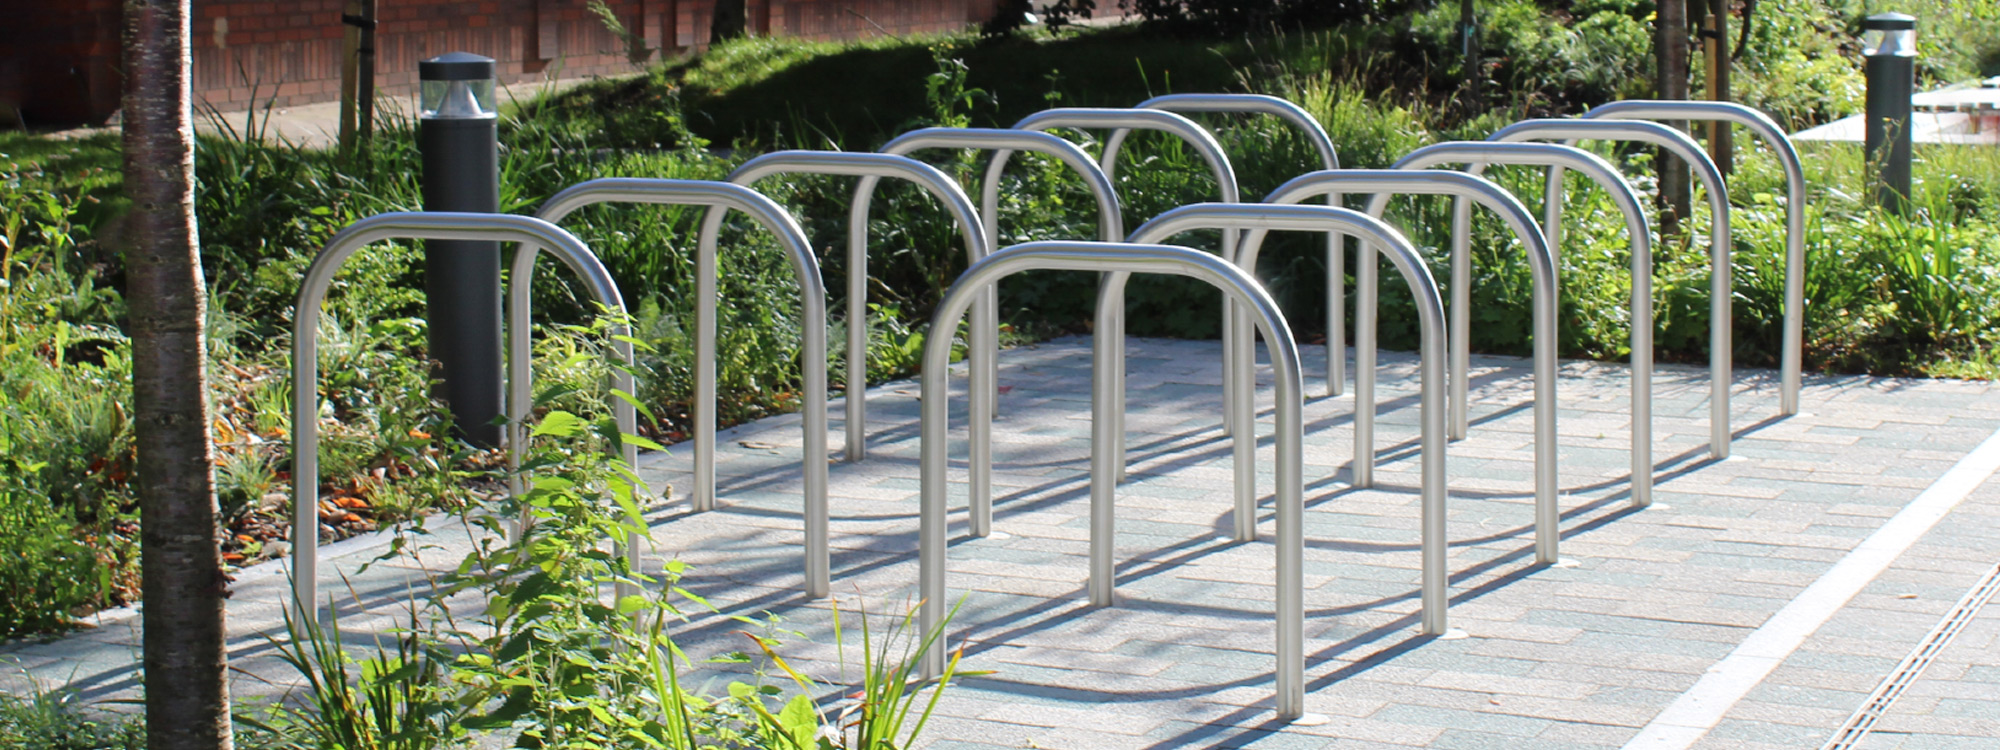 CYCLE STANDS FROM SFD